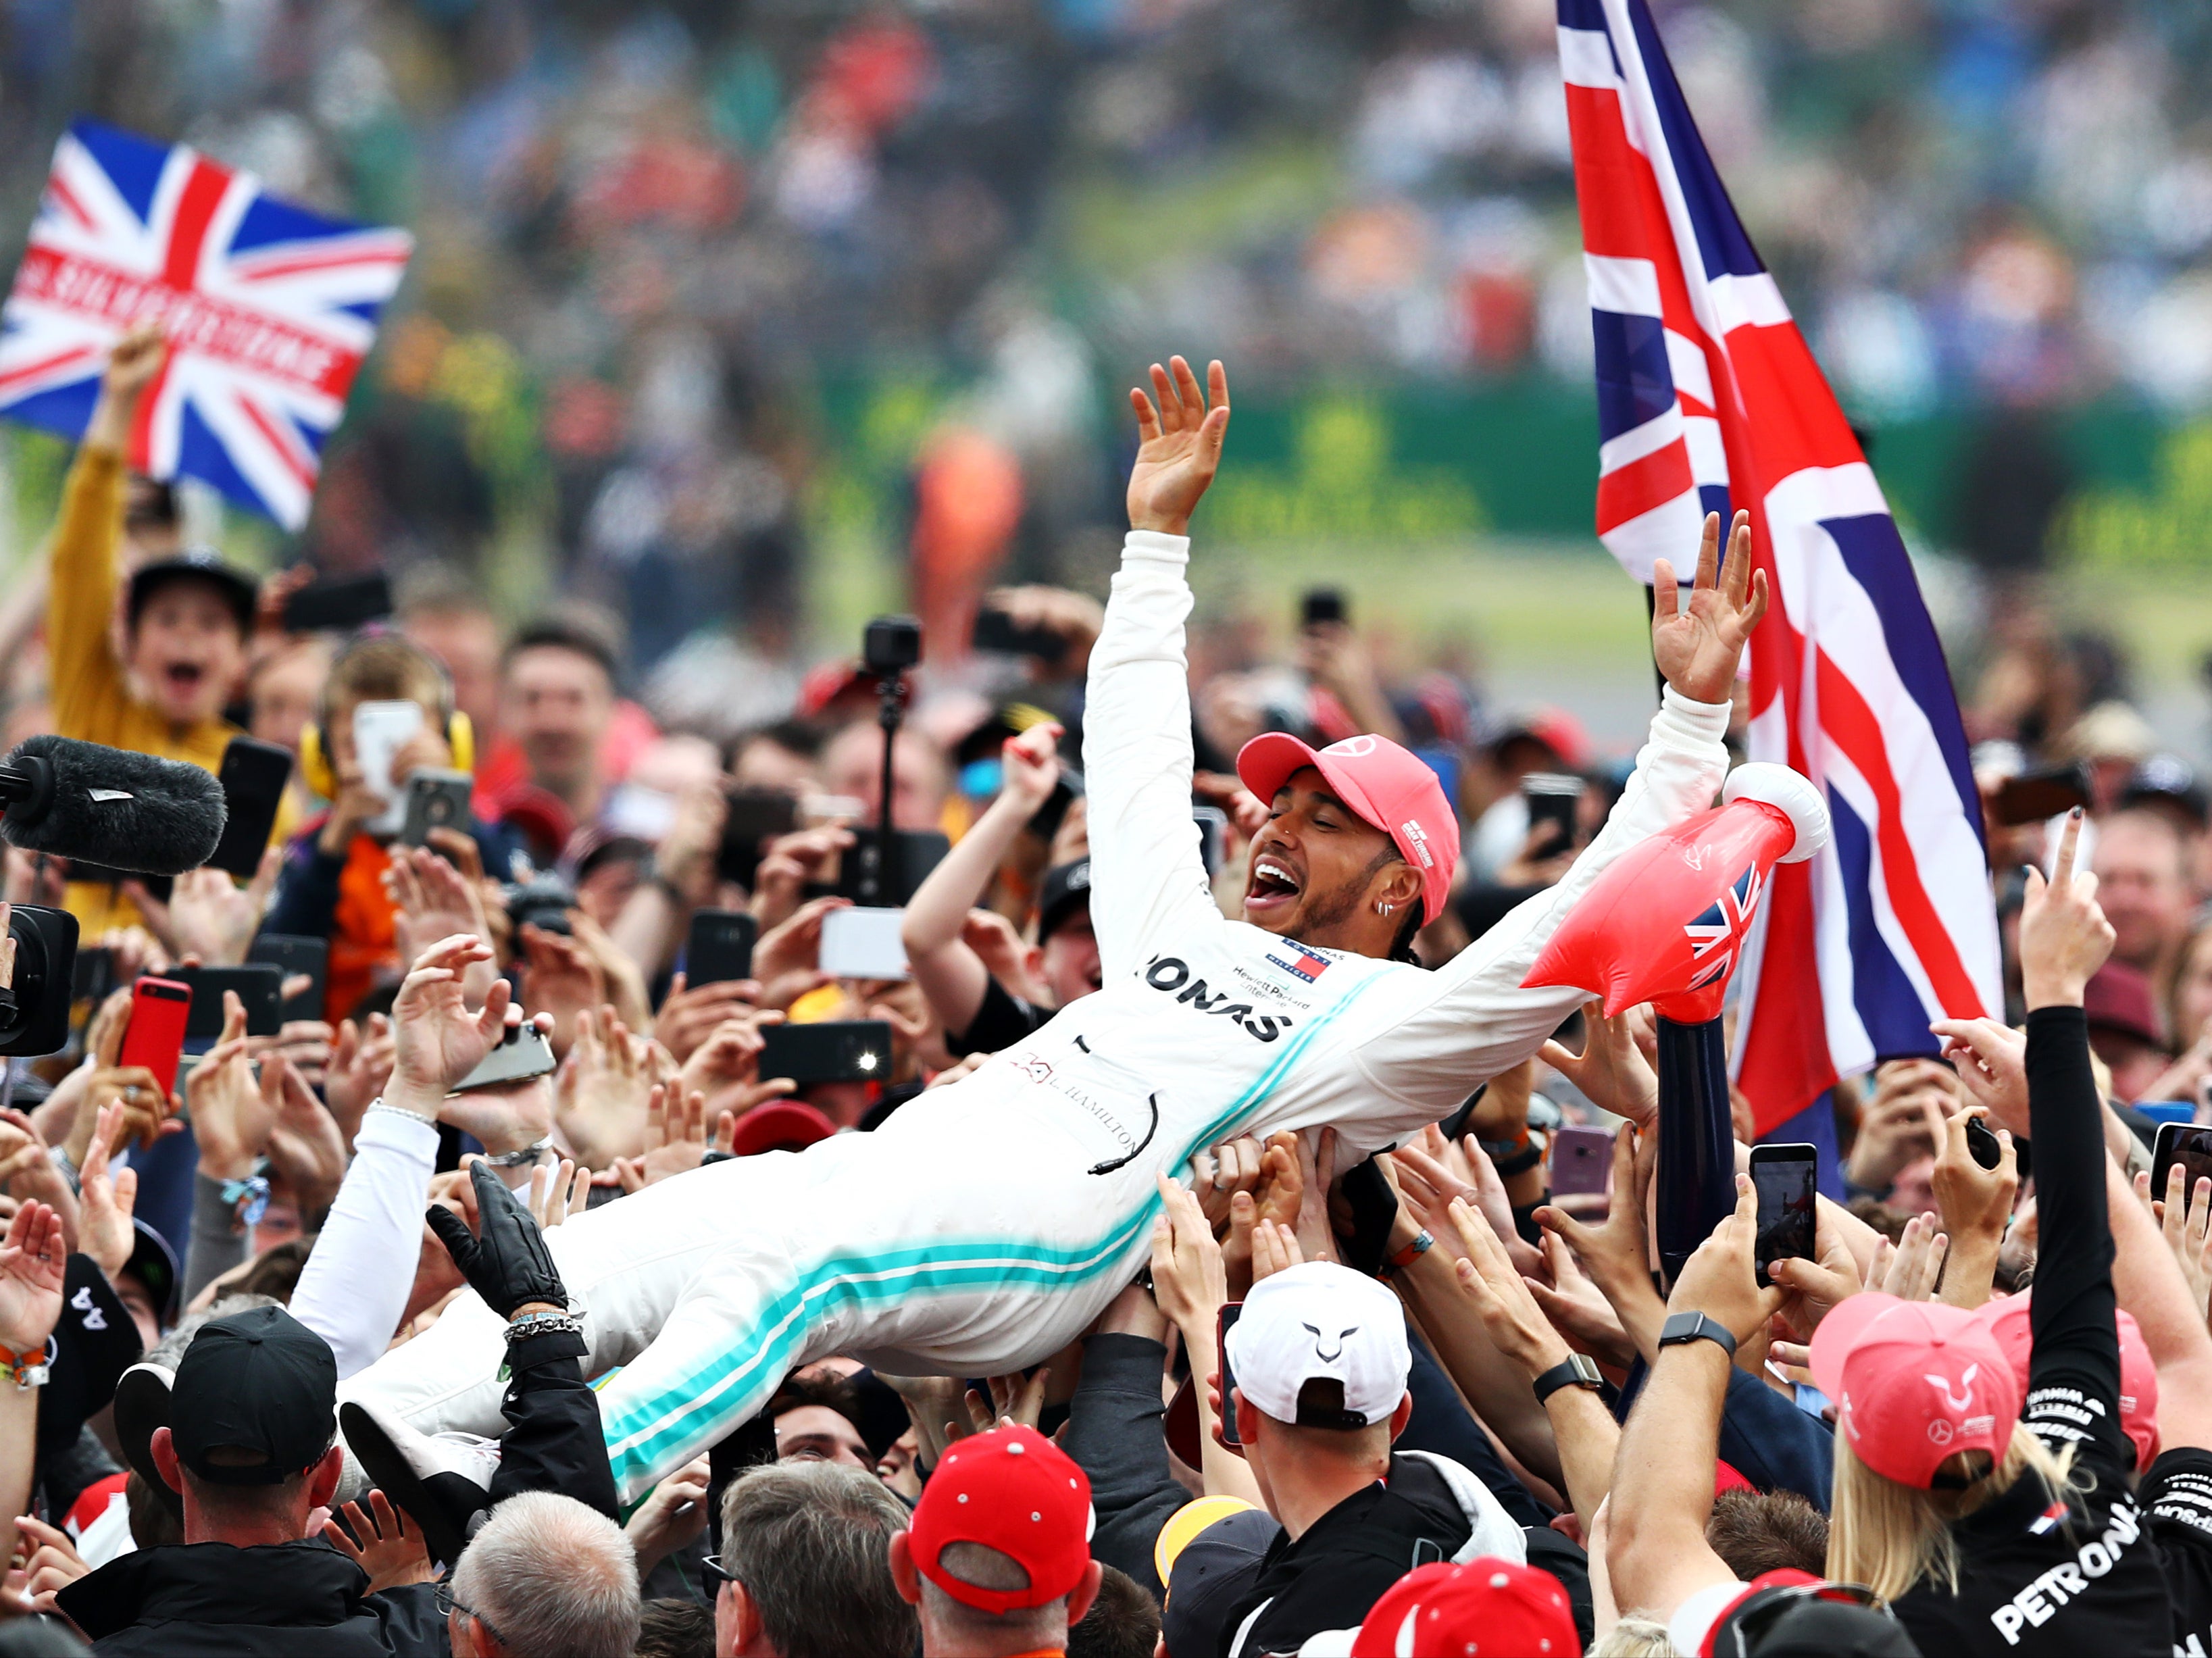 The British Grand Prix is a hugely popular event